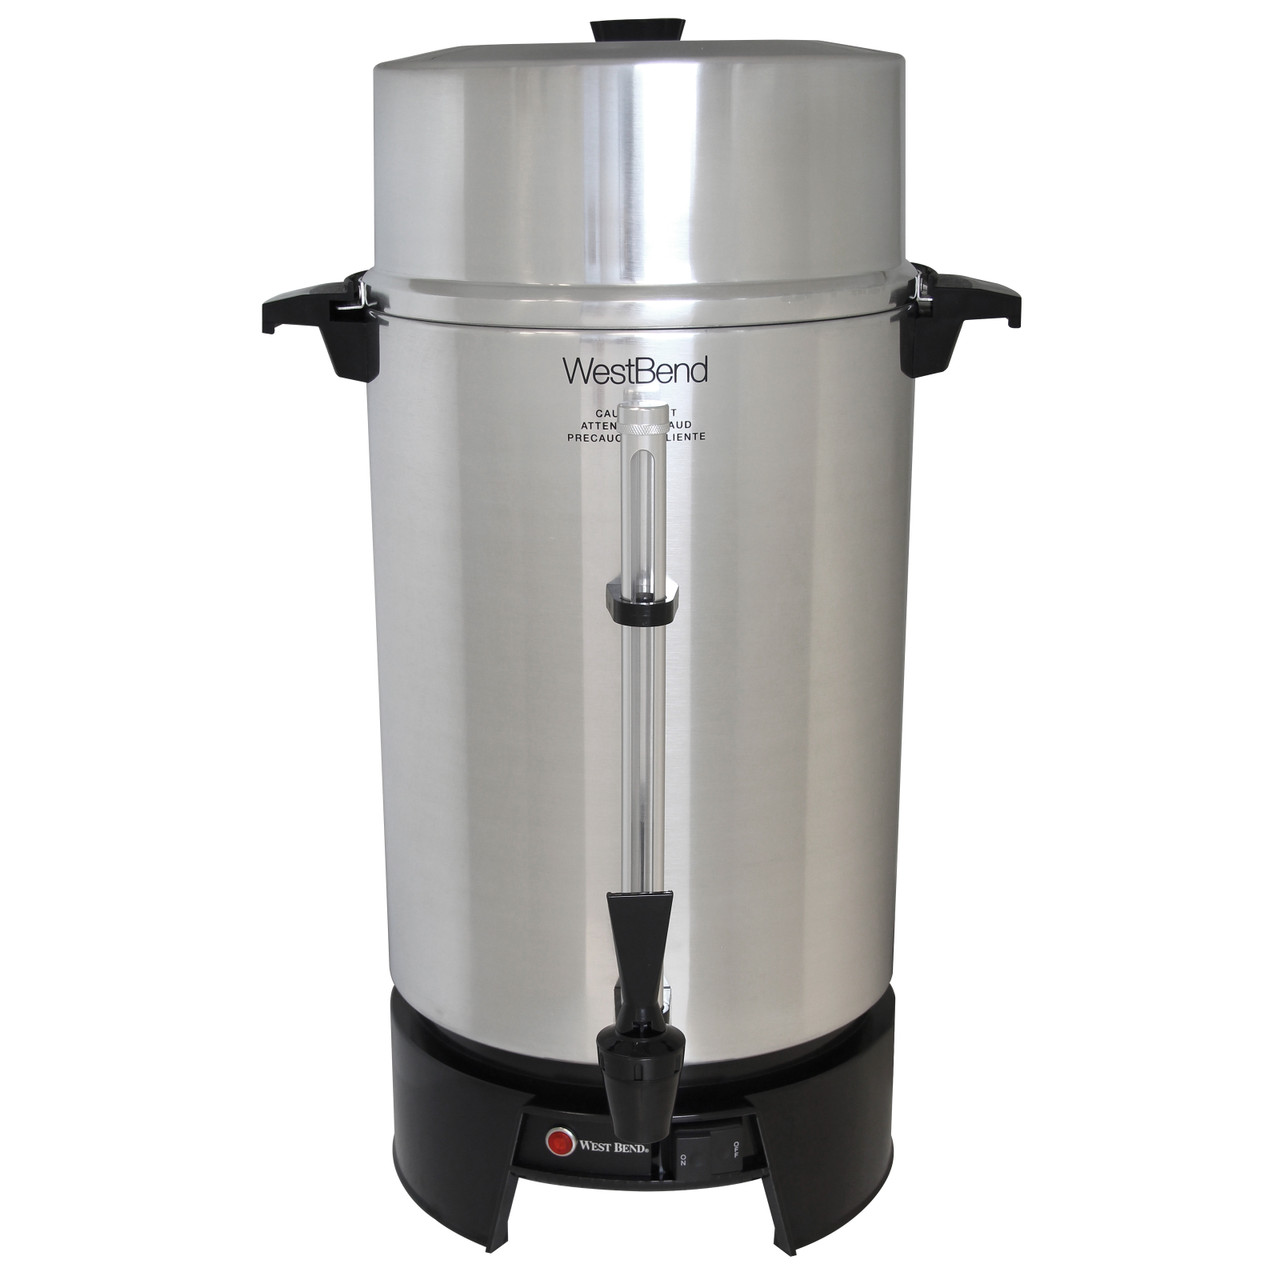 Proctor-Silex Commercial Aluminum Coffee Urn: 100 Cups